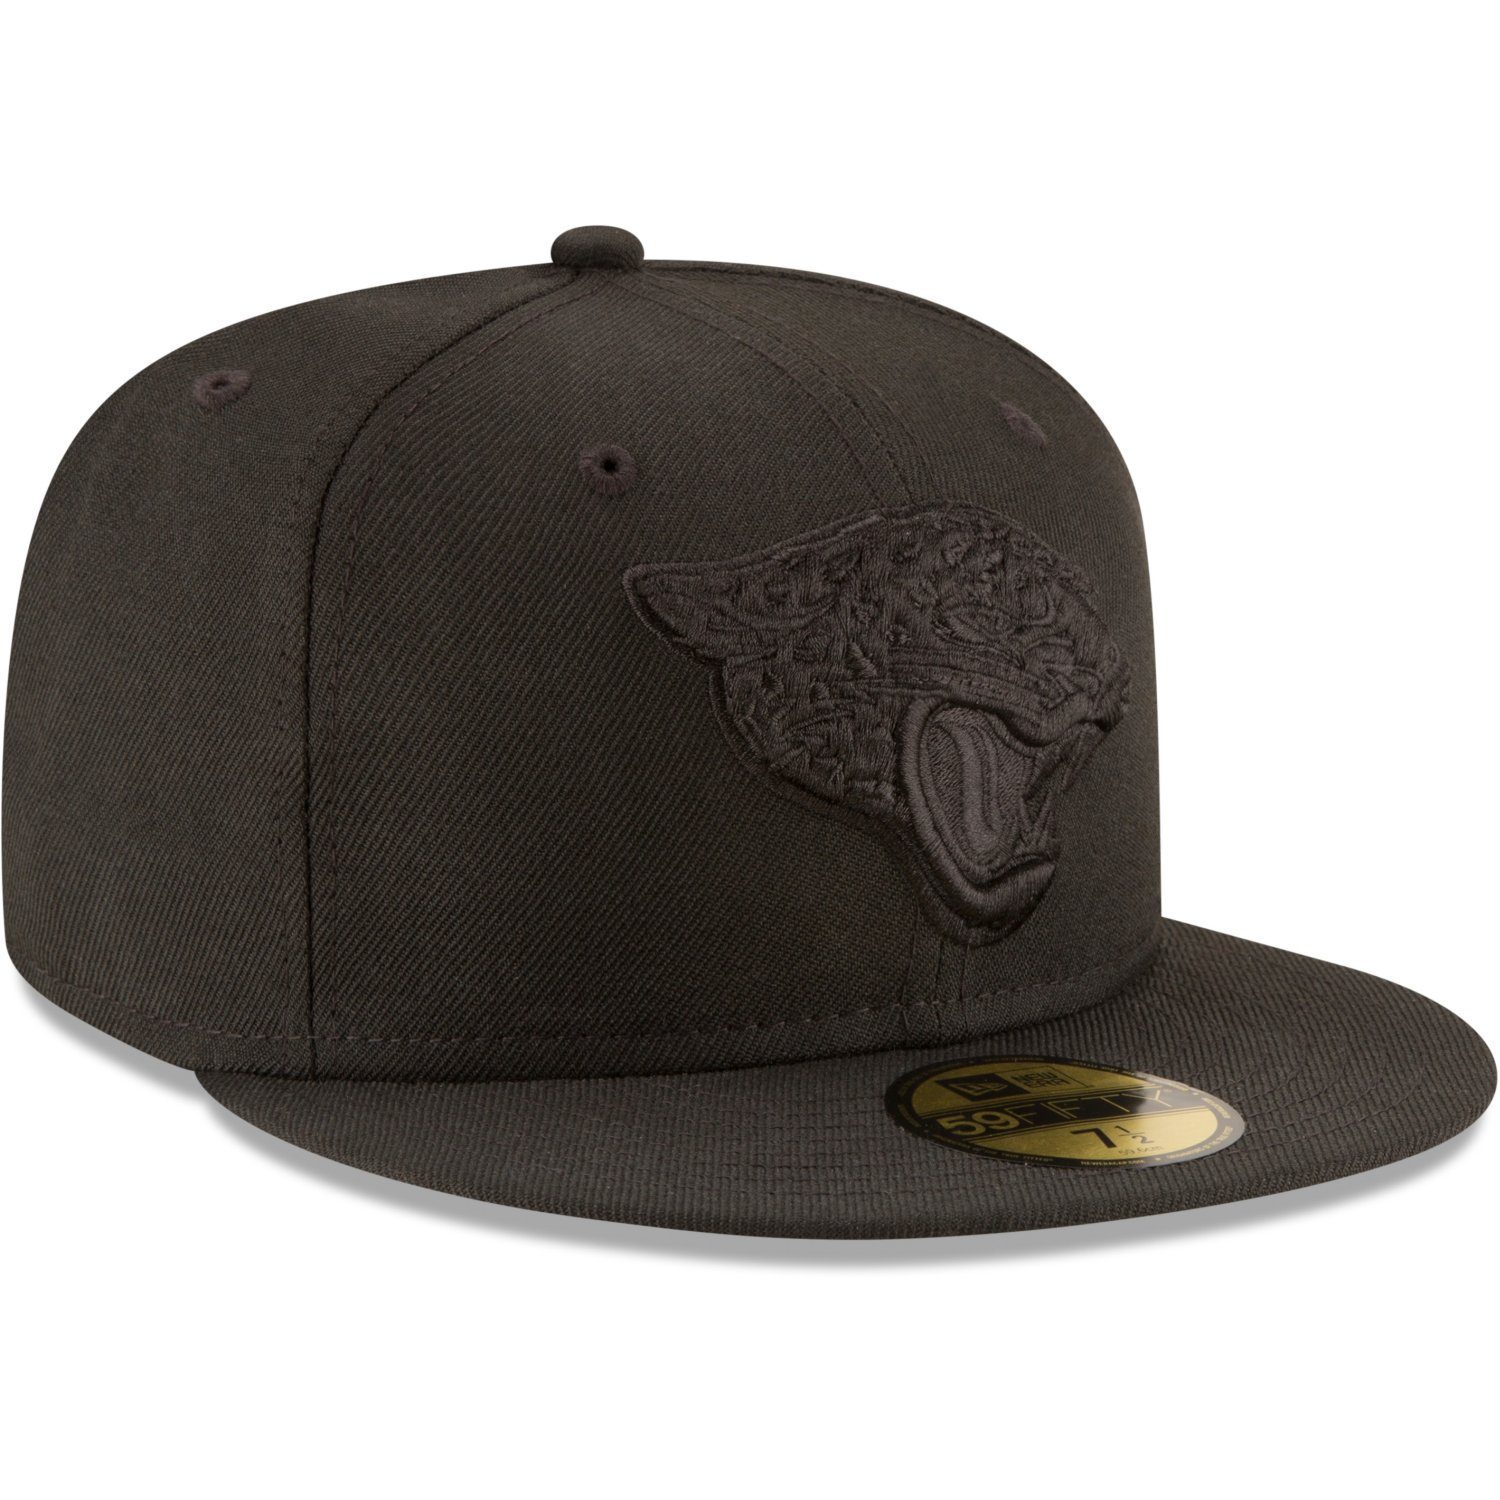 Fitted Era Jacksonville New NFL Jaguars Cap 59Fifty